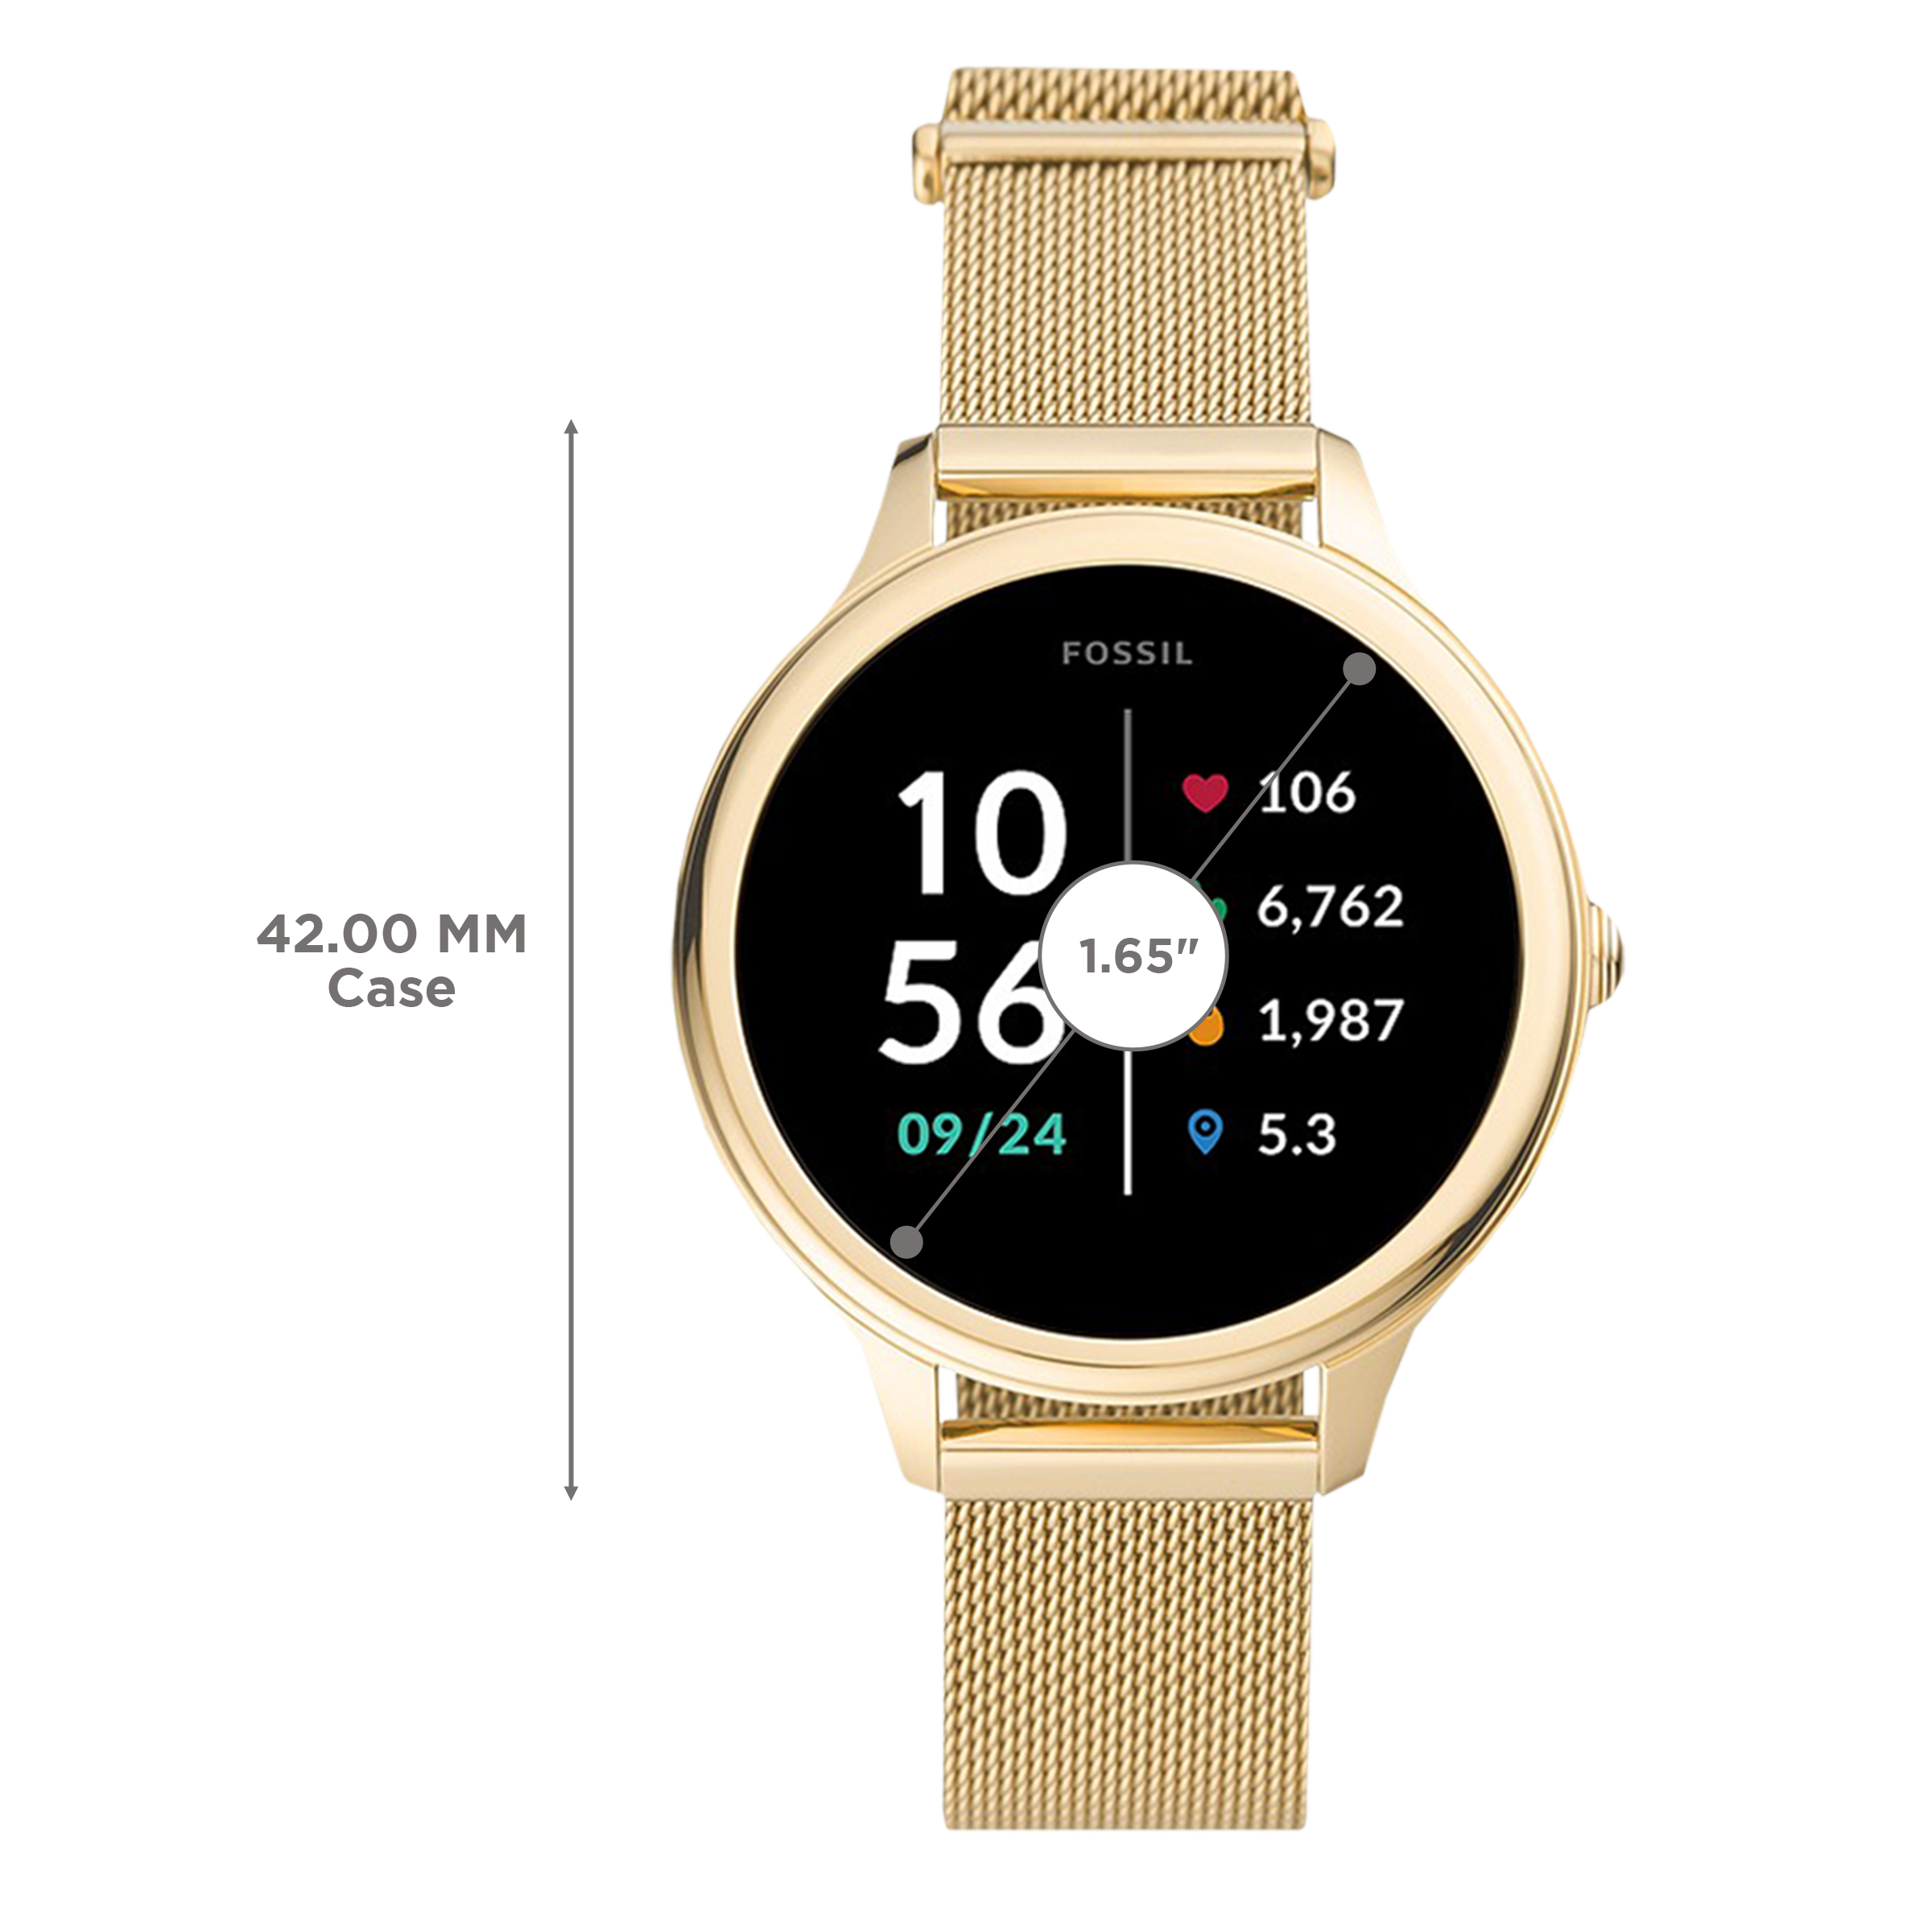 Fossil Gen 5E Smartwatch with Activity Tracker (42mm AMOLED Display, 3ATM Water Resistant, Gold Strap)_3